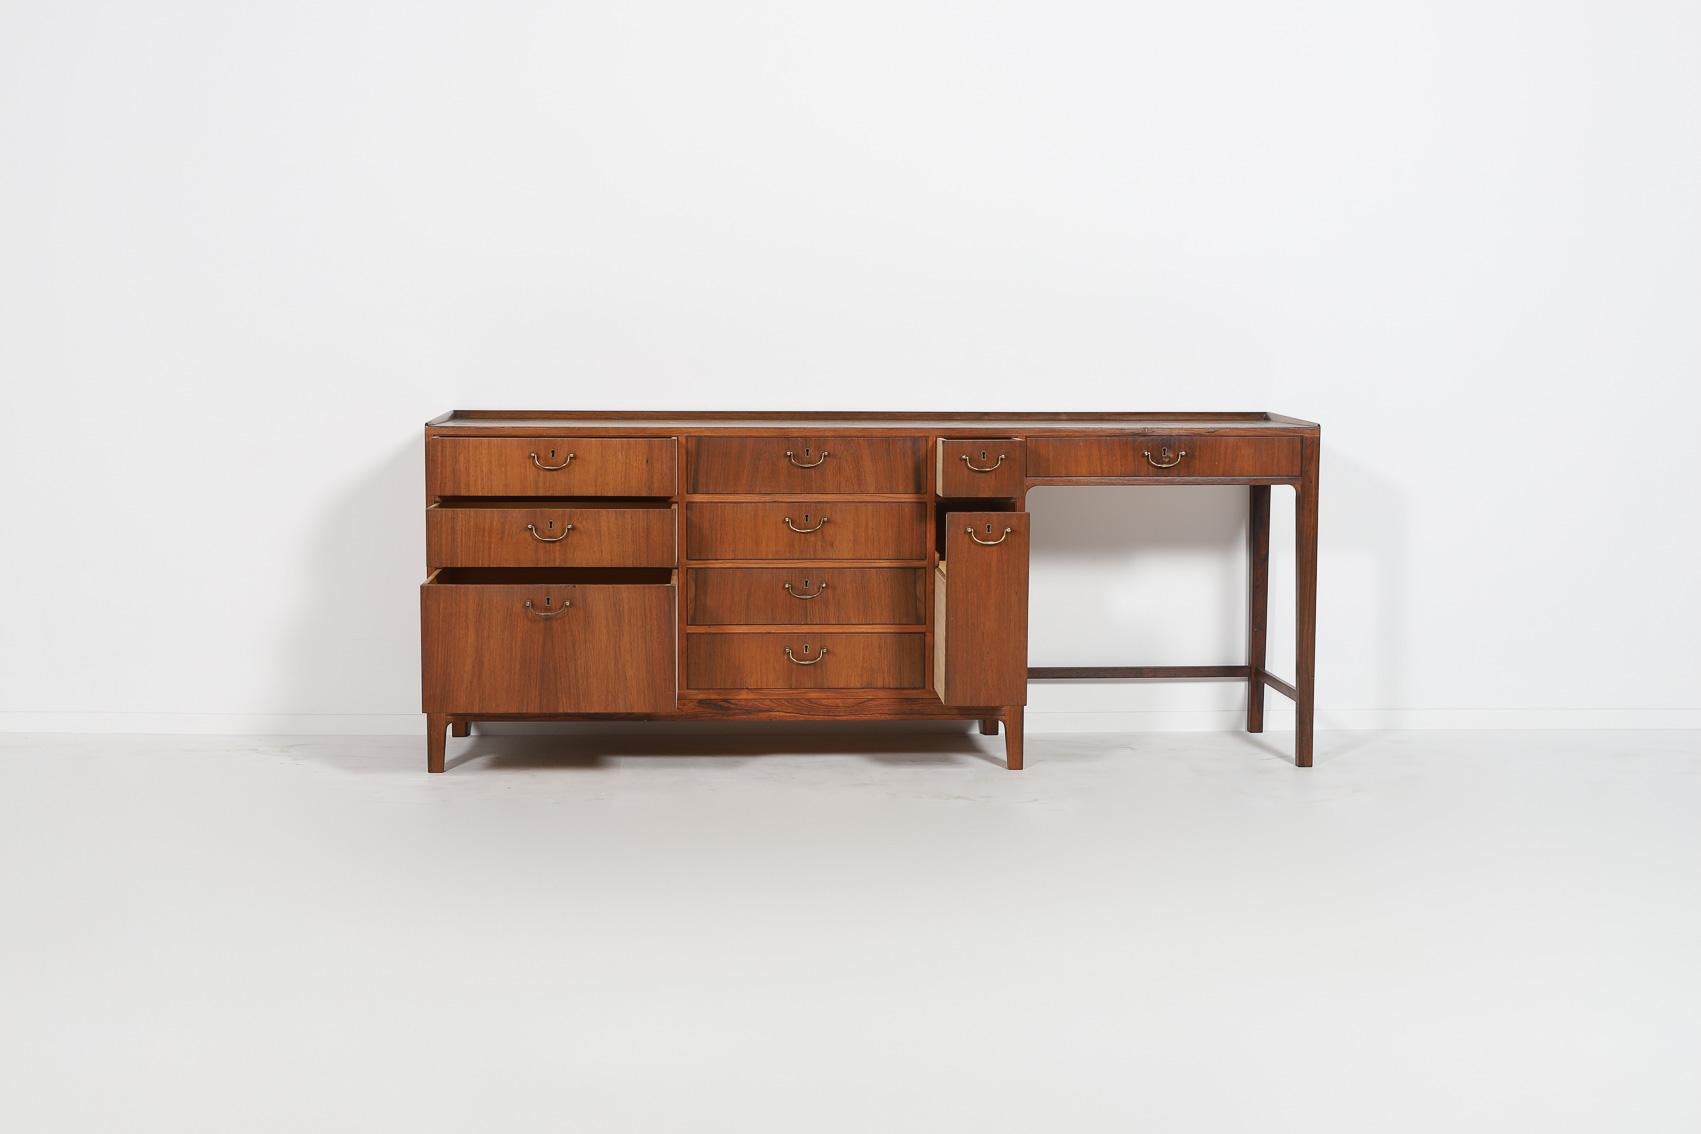 Mid-Century Modern stunning  walnut veneer sideboard designed by Frode Holm in 1950’s for Illums Bolighus, Denmark. Fitted with various sized drawers and casted brass handles.

Condition
Good, age related wear and marks.

Dimensions
height: 72